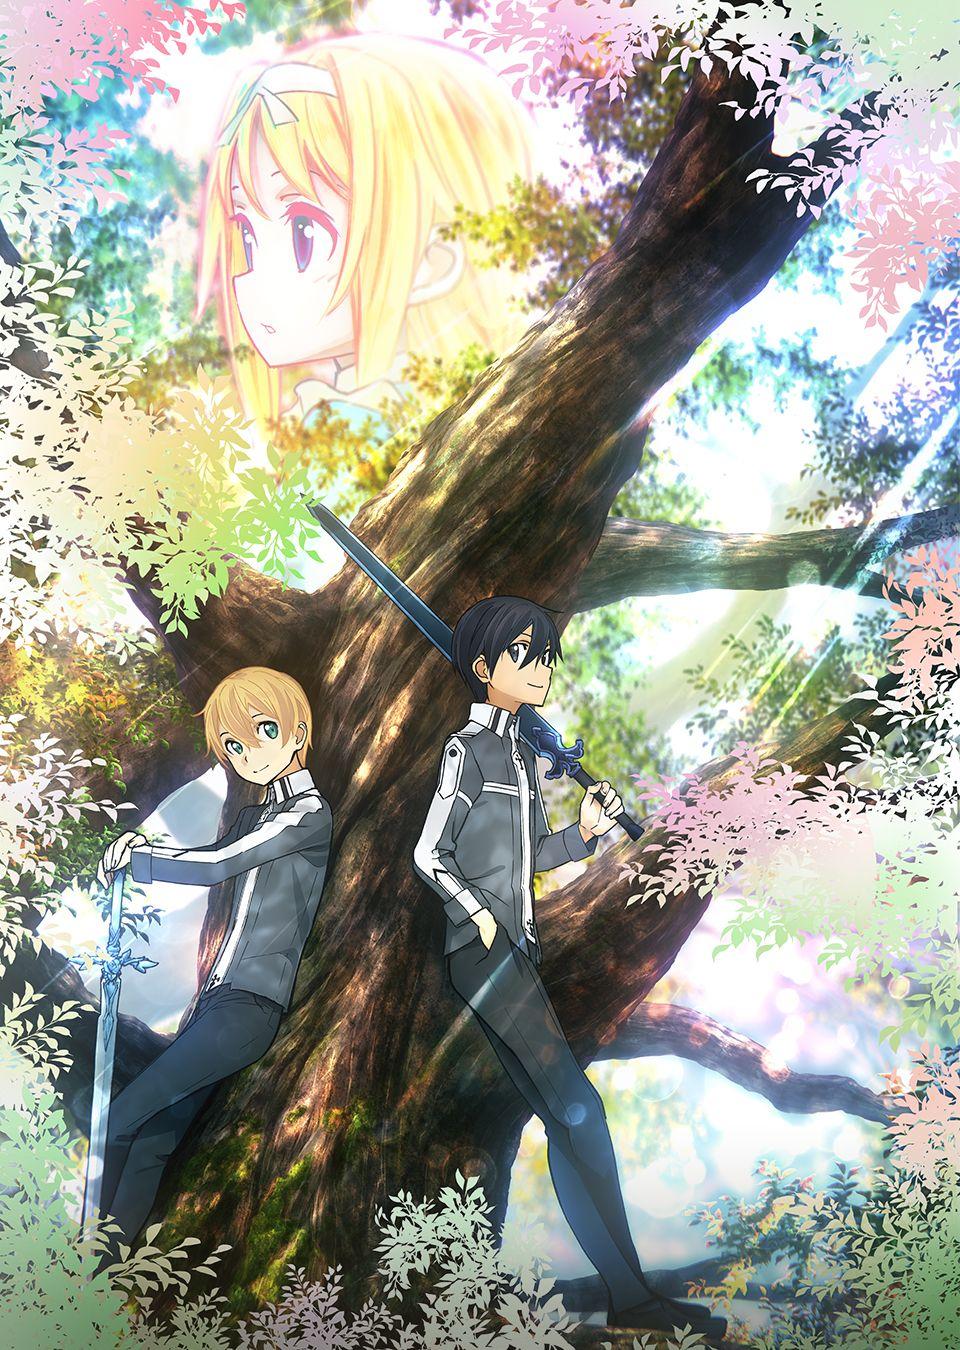 Sword Art Online: Alicization reveals new key visual, PV, and